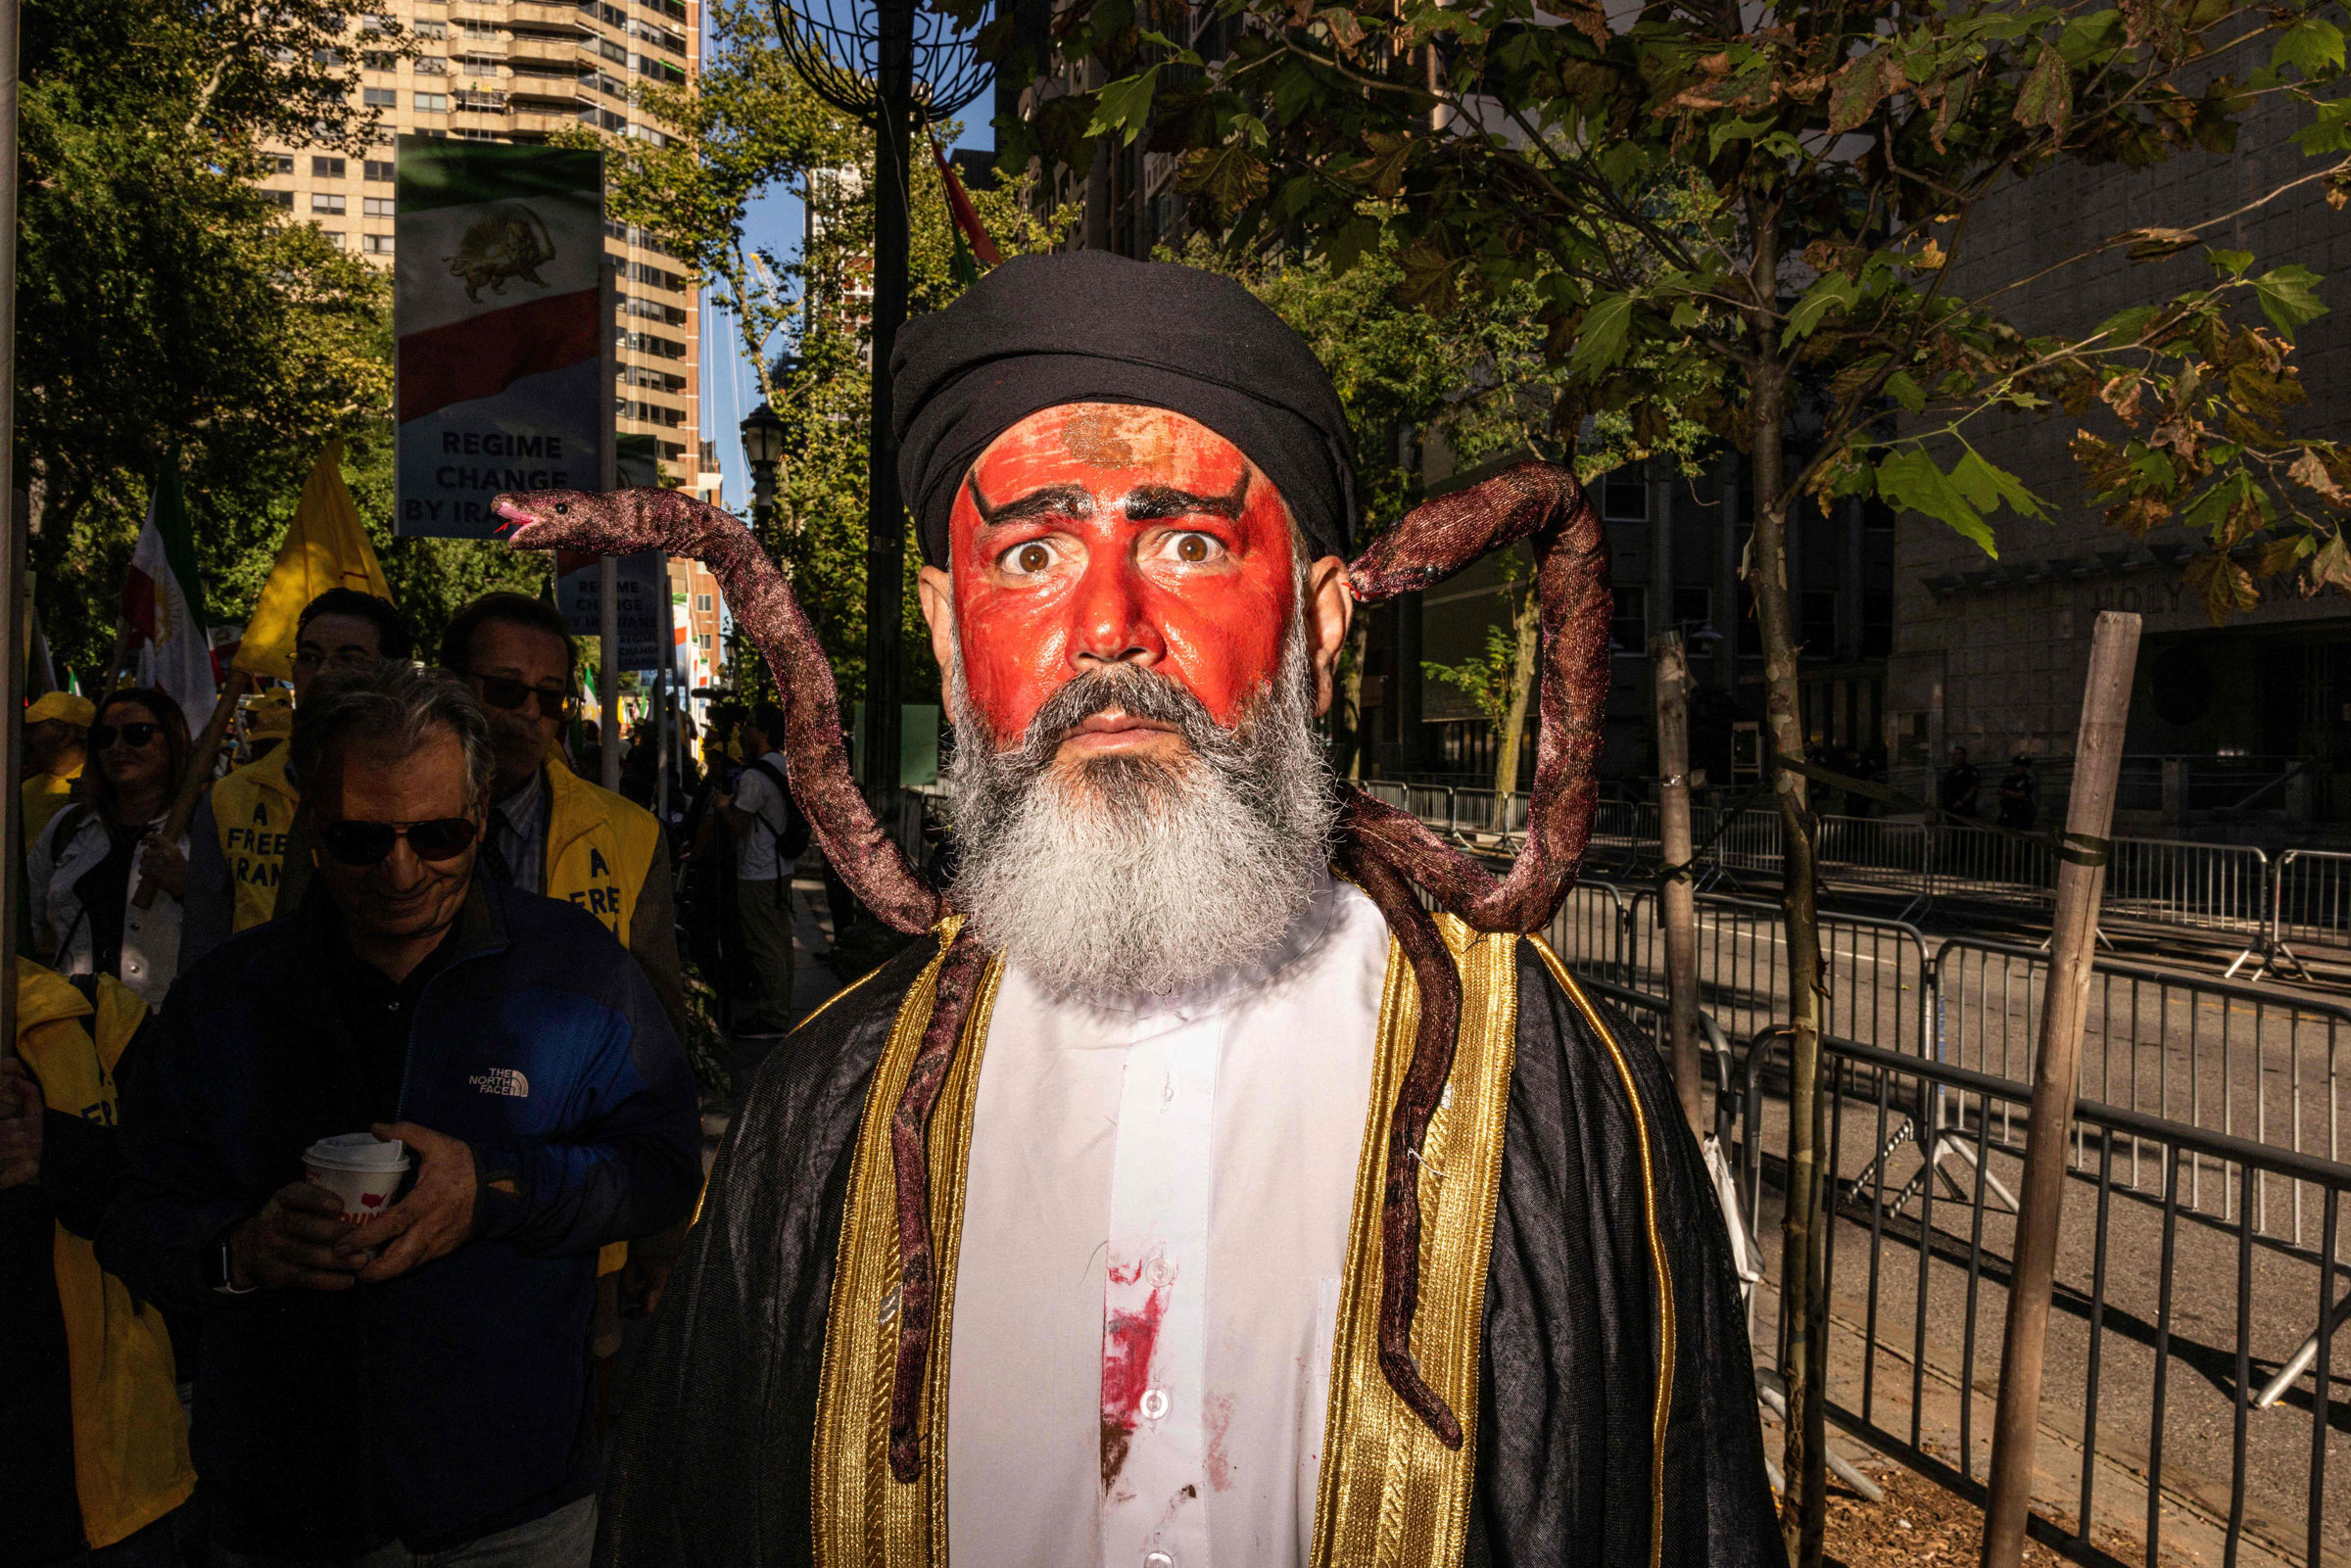 <b>New York, NY </b>A person dressed as Iranian President Ebrahim Rasi covered in blood with snakes on his shoulders participates in a protest against Iranian President Ebrahim Raisi during a rally in New York City on Sept. 21, 2022, amid the 77th session of the United Nations General Assembly. (Alex Kent—AFP/Getty Images)